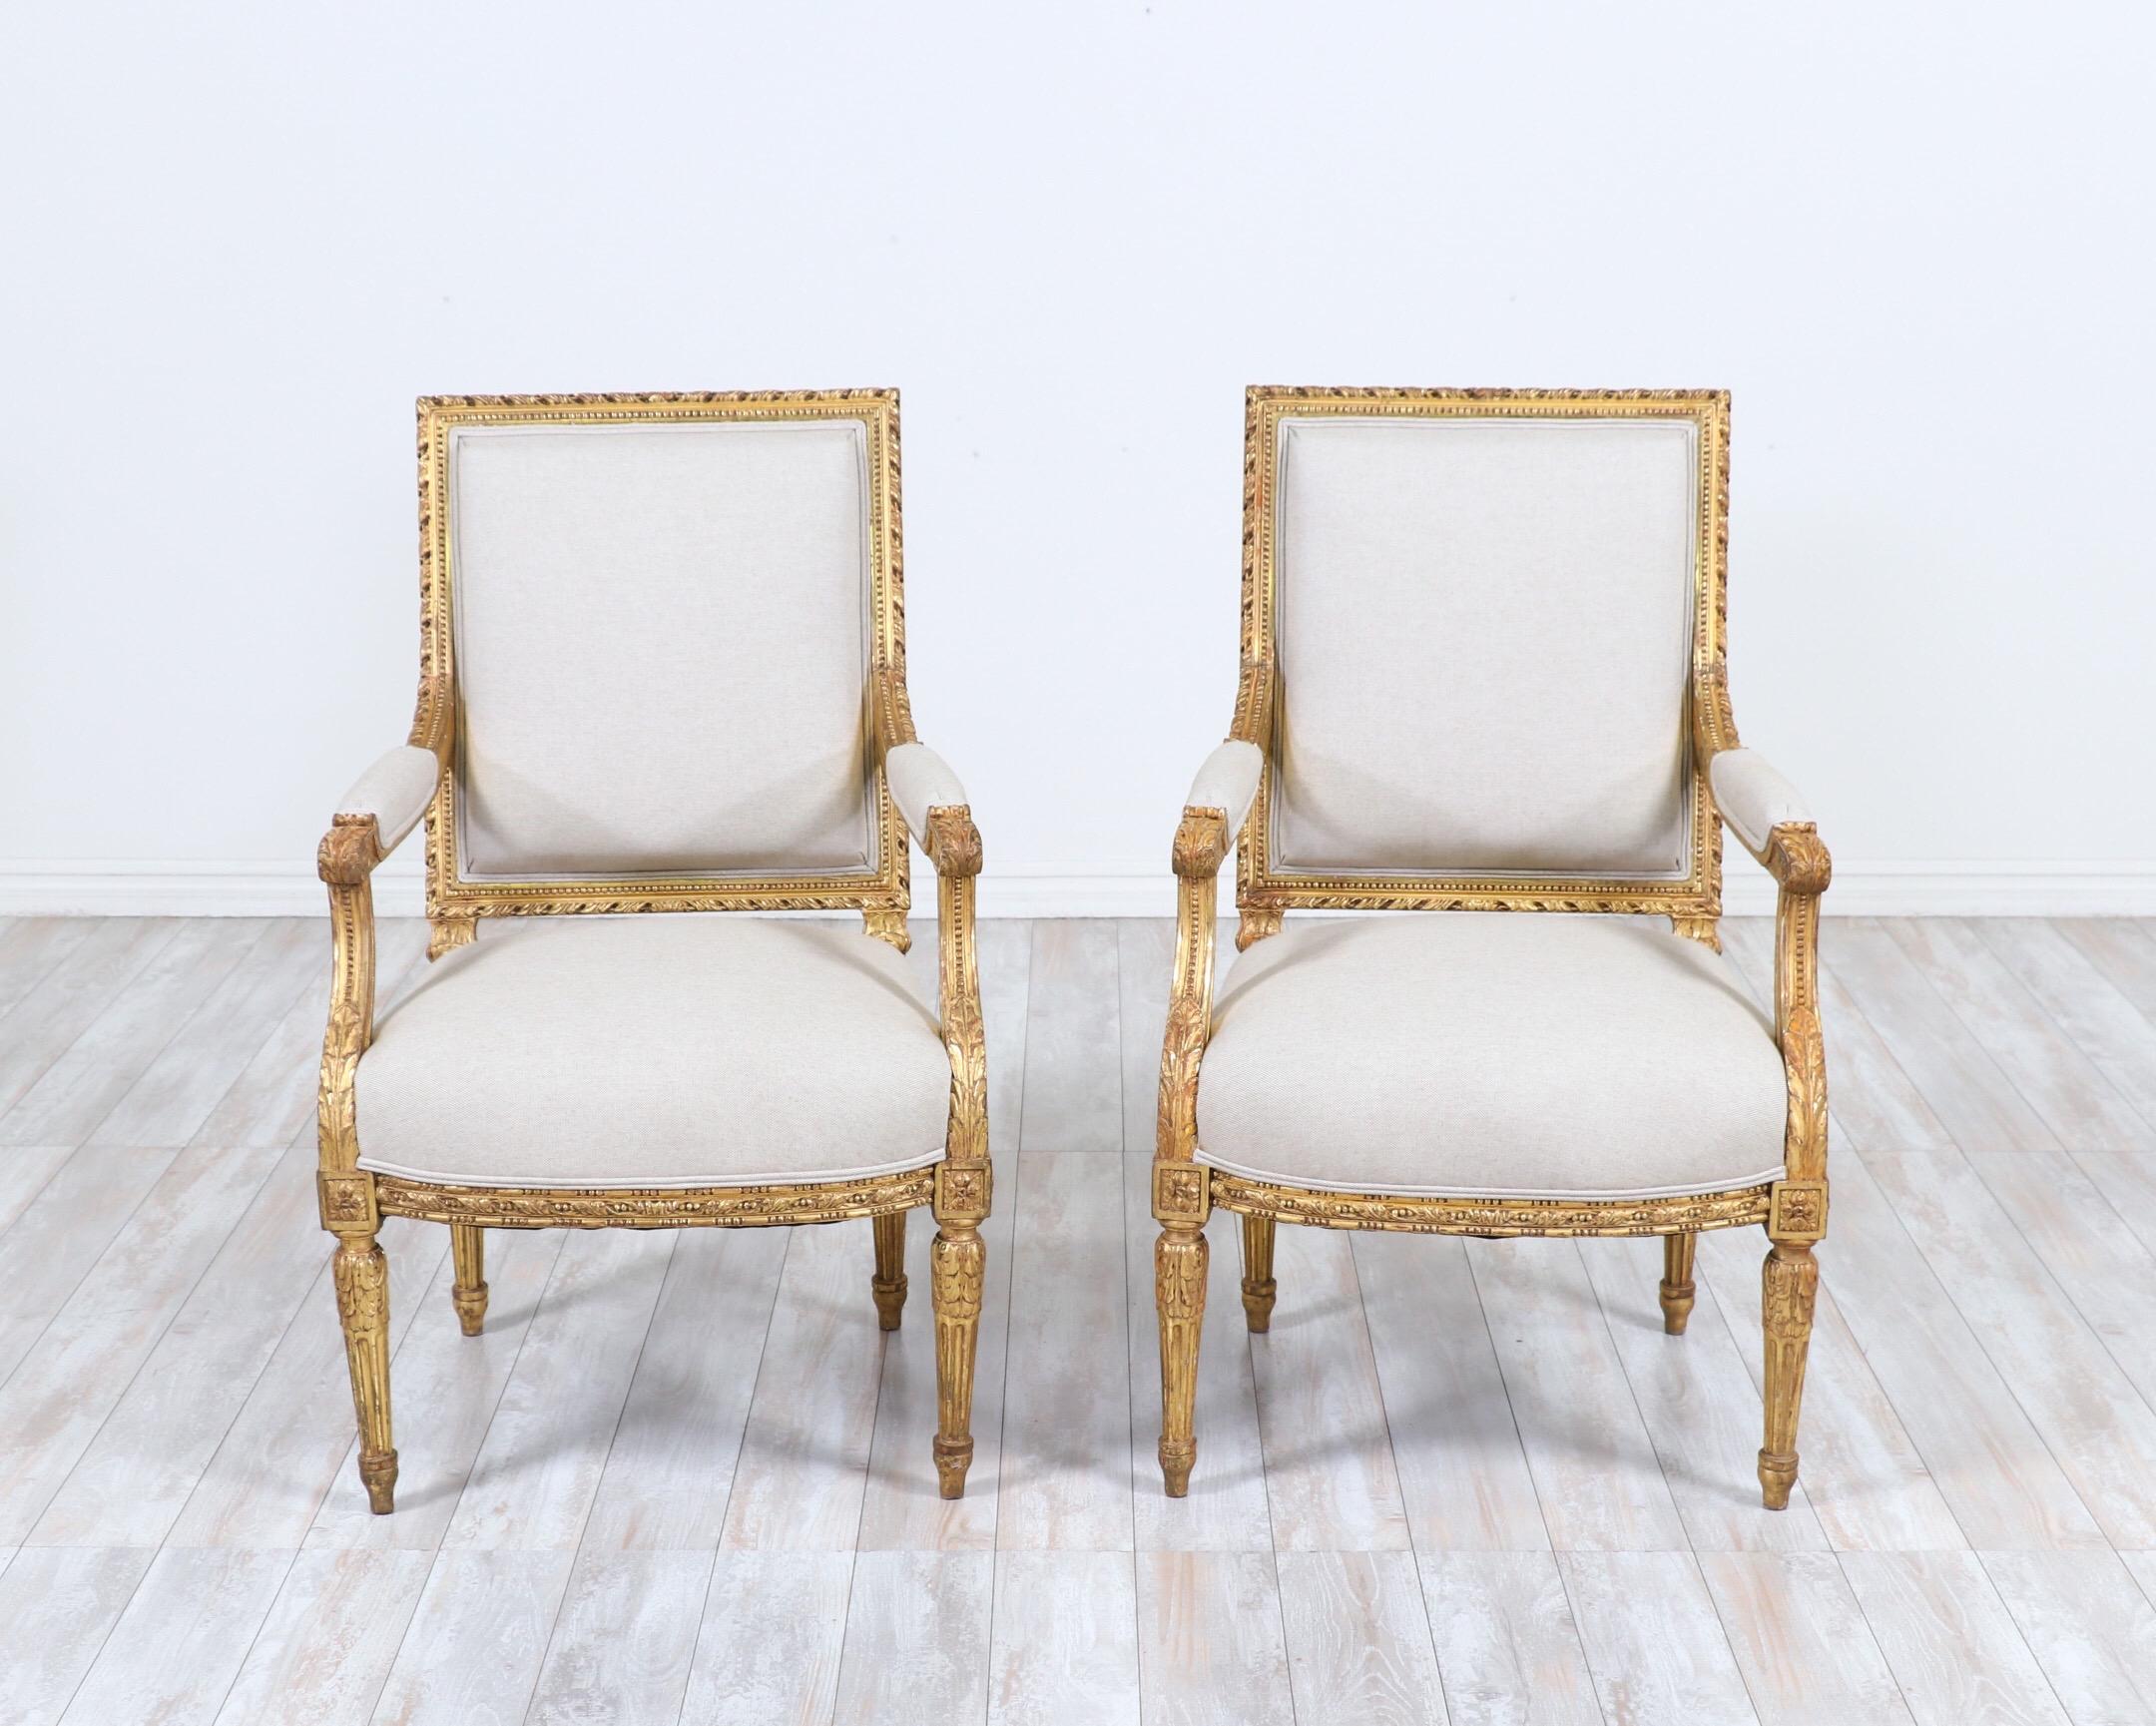 Gorgeous, 1920s French Louis XVI-style giltwood fauteuils with delicately carved decorations and new linen canvas upholstery. 

The Classic design of these antique French chairs make them perfect for traditional European to contemporary